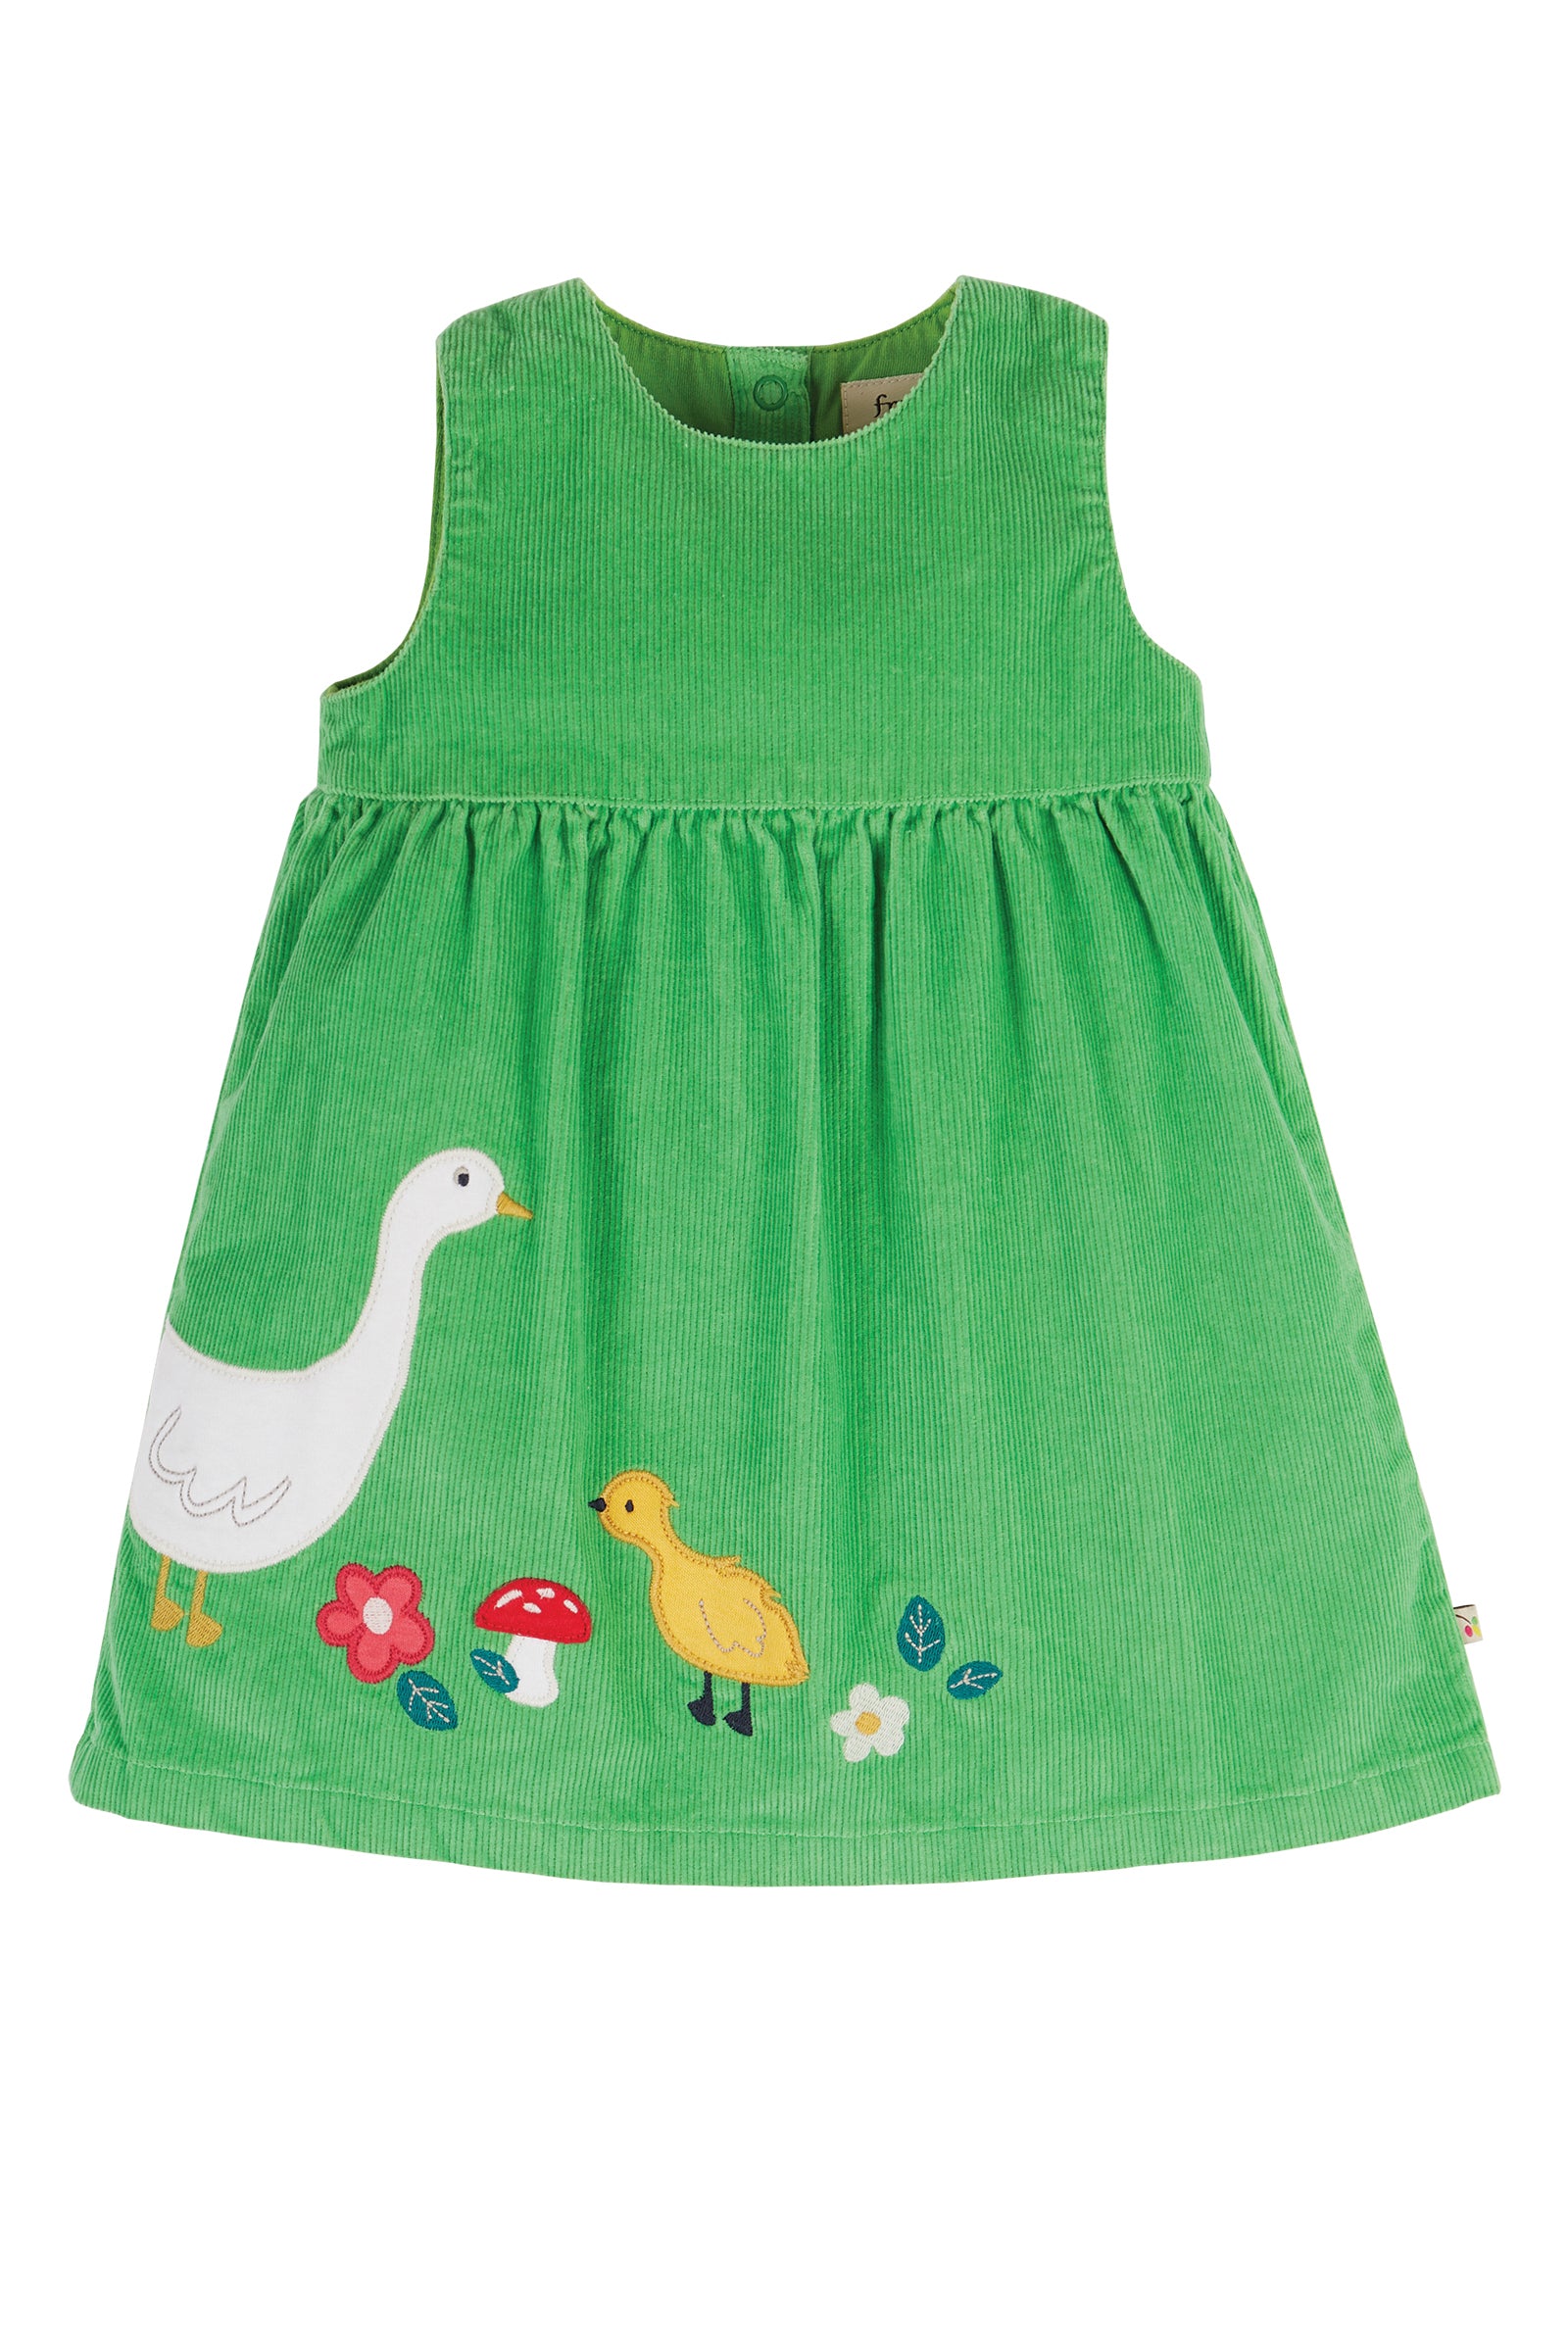 Frugi Lily Cord Dress - Fjord Green/Duck